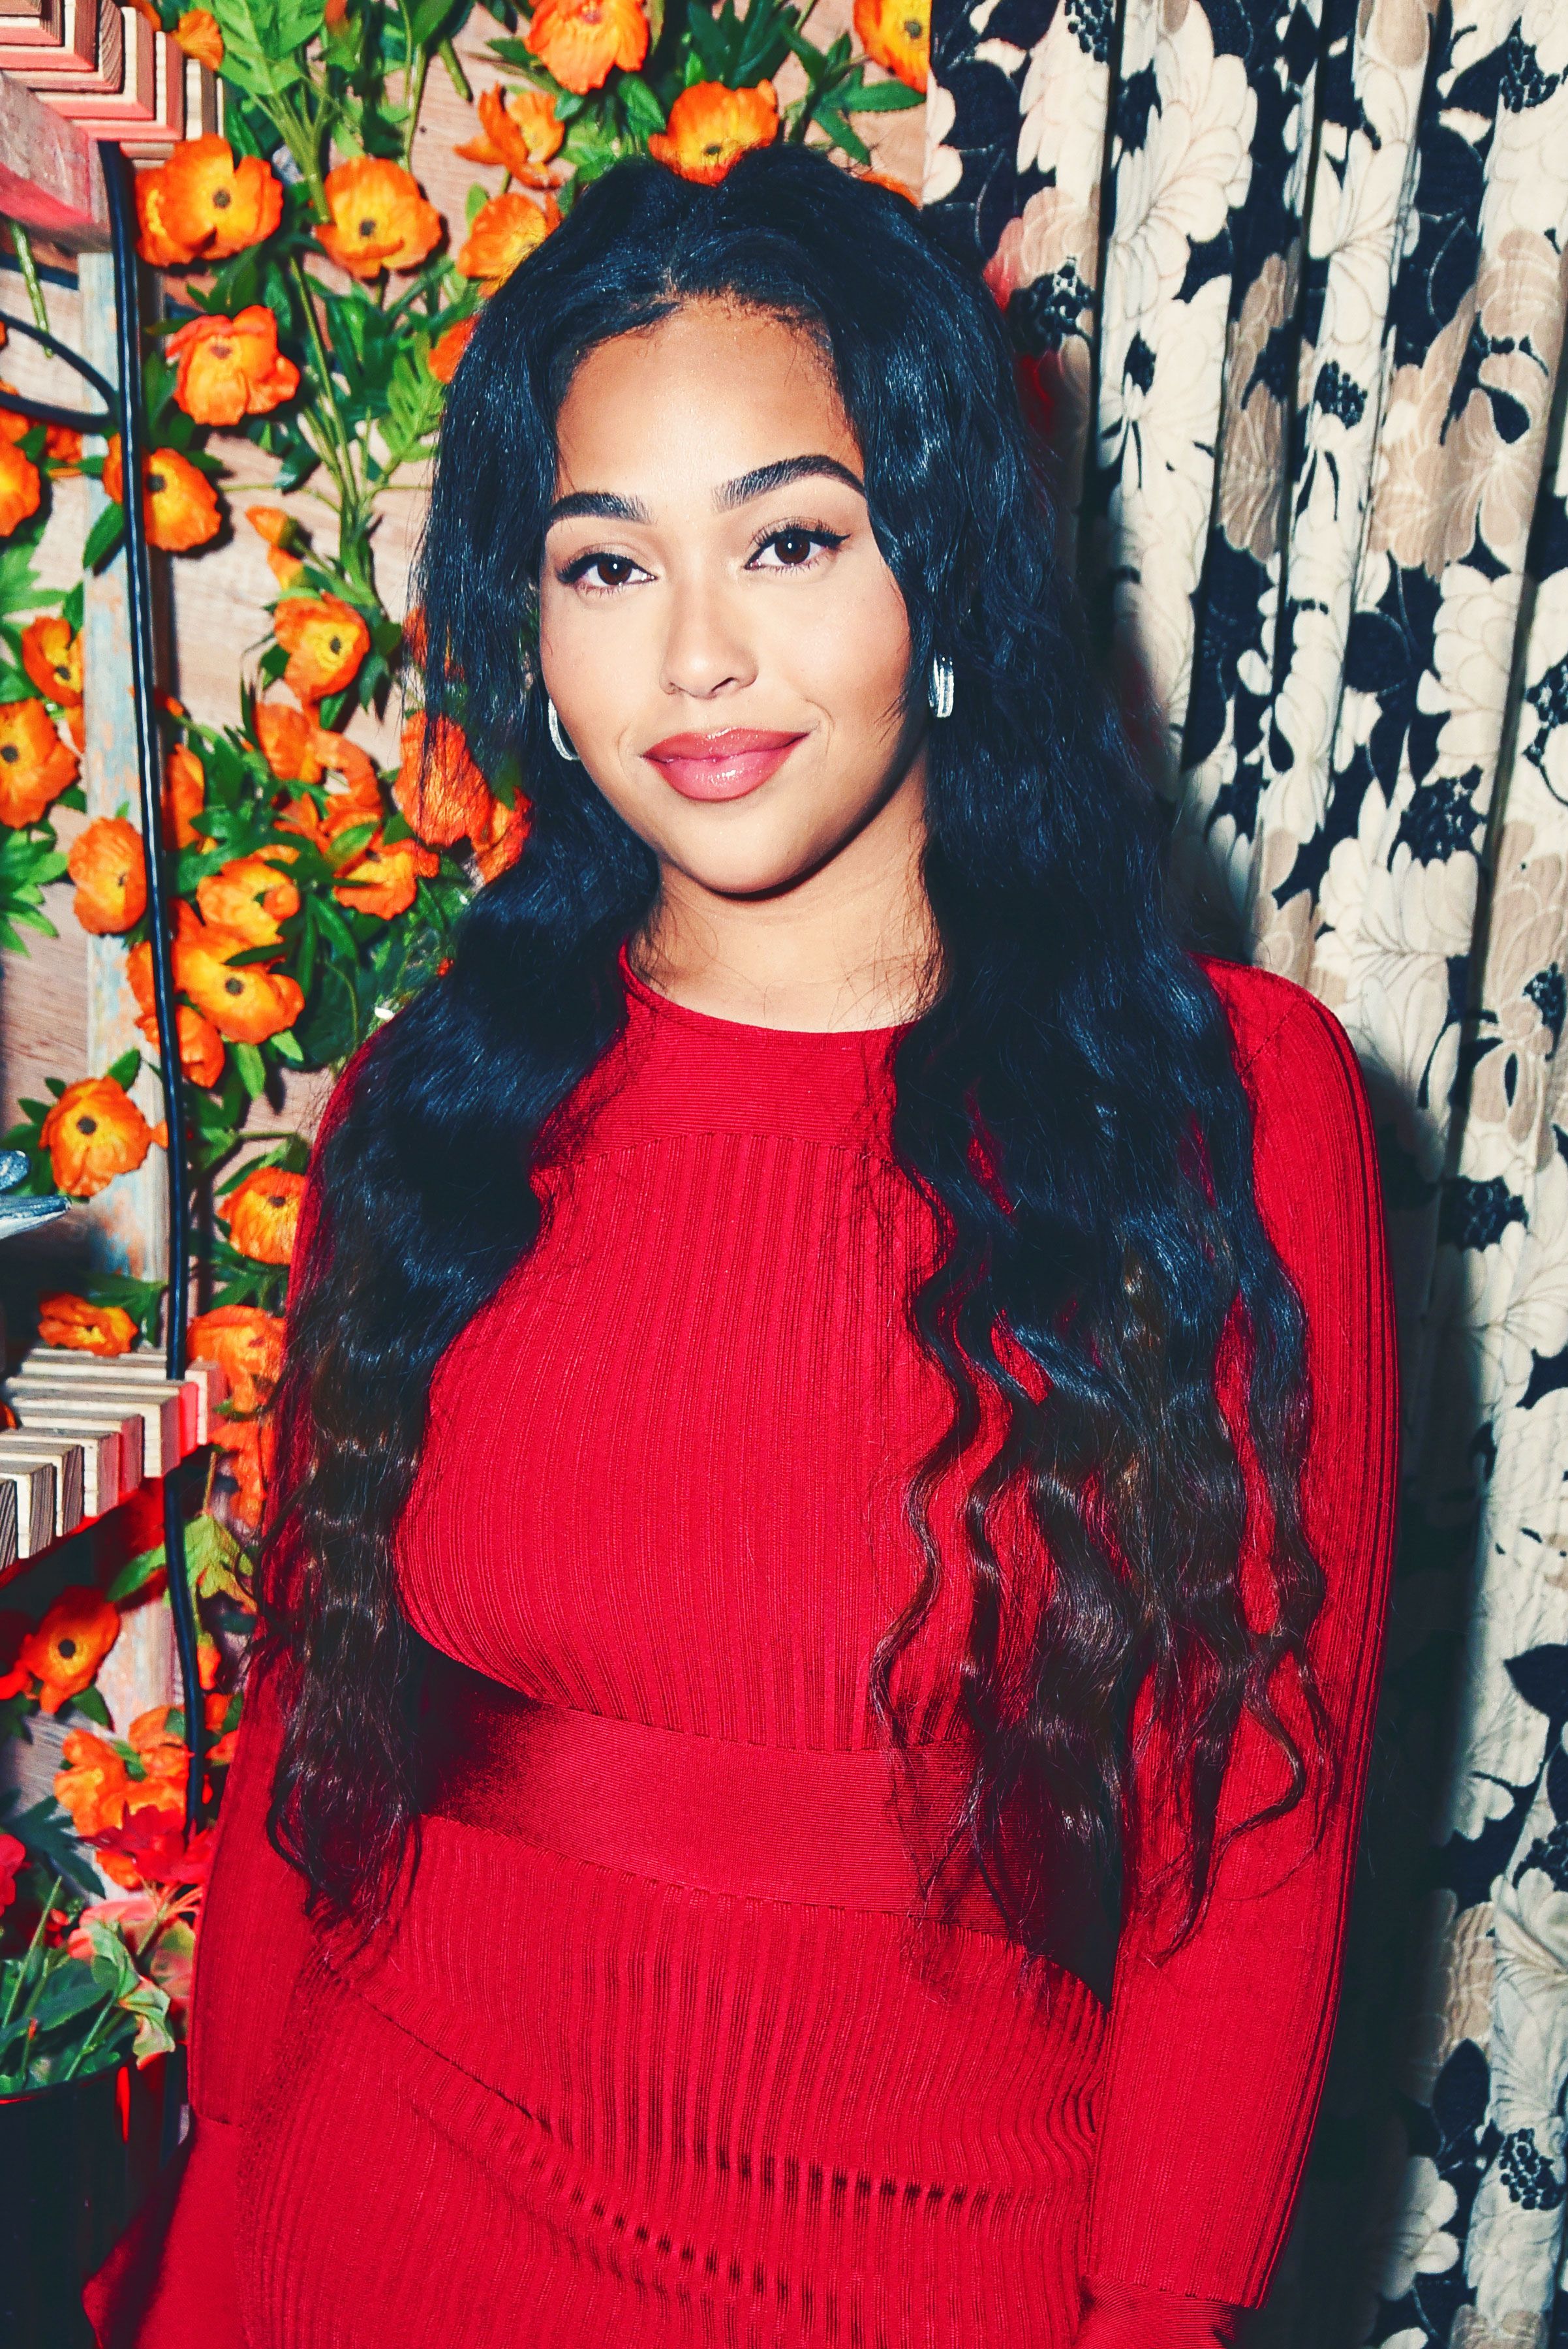 Jordyn Woods First on Red Table Talk: How To